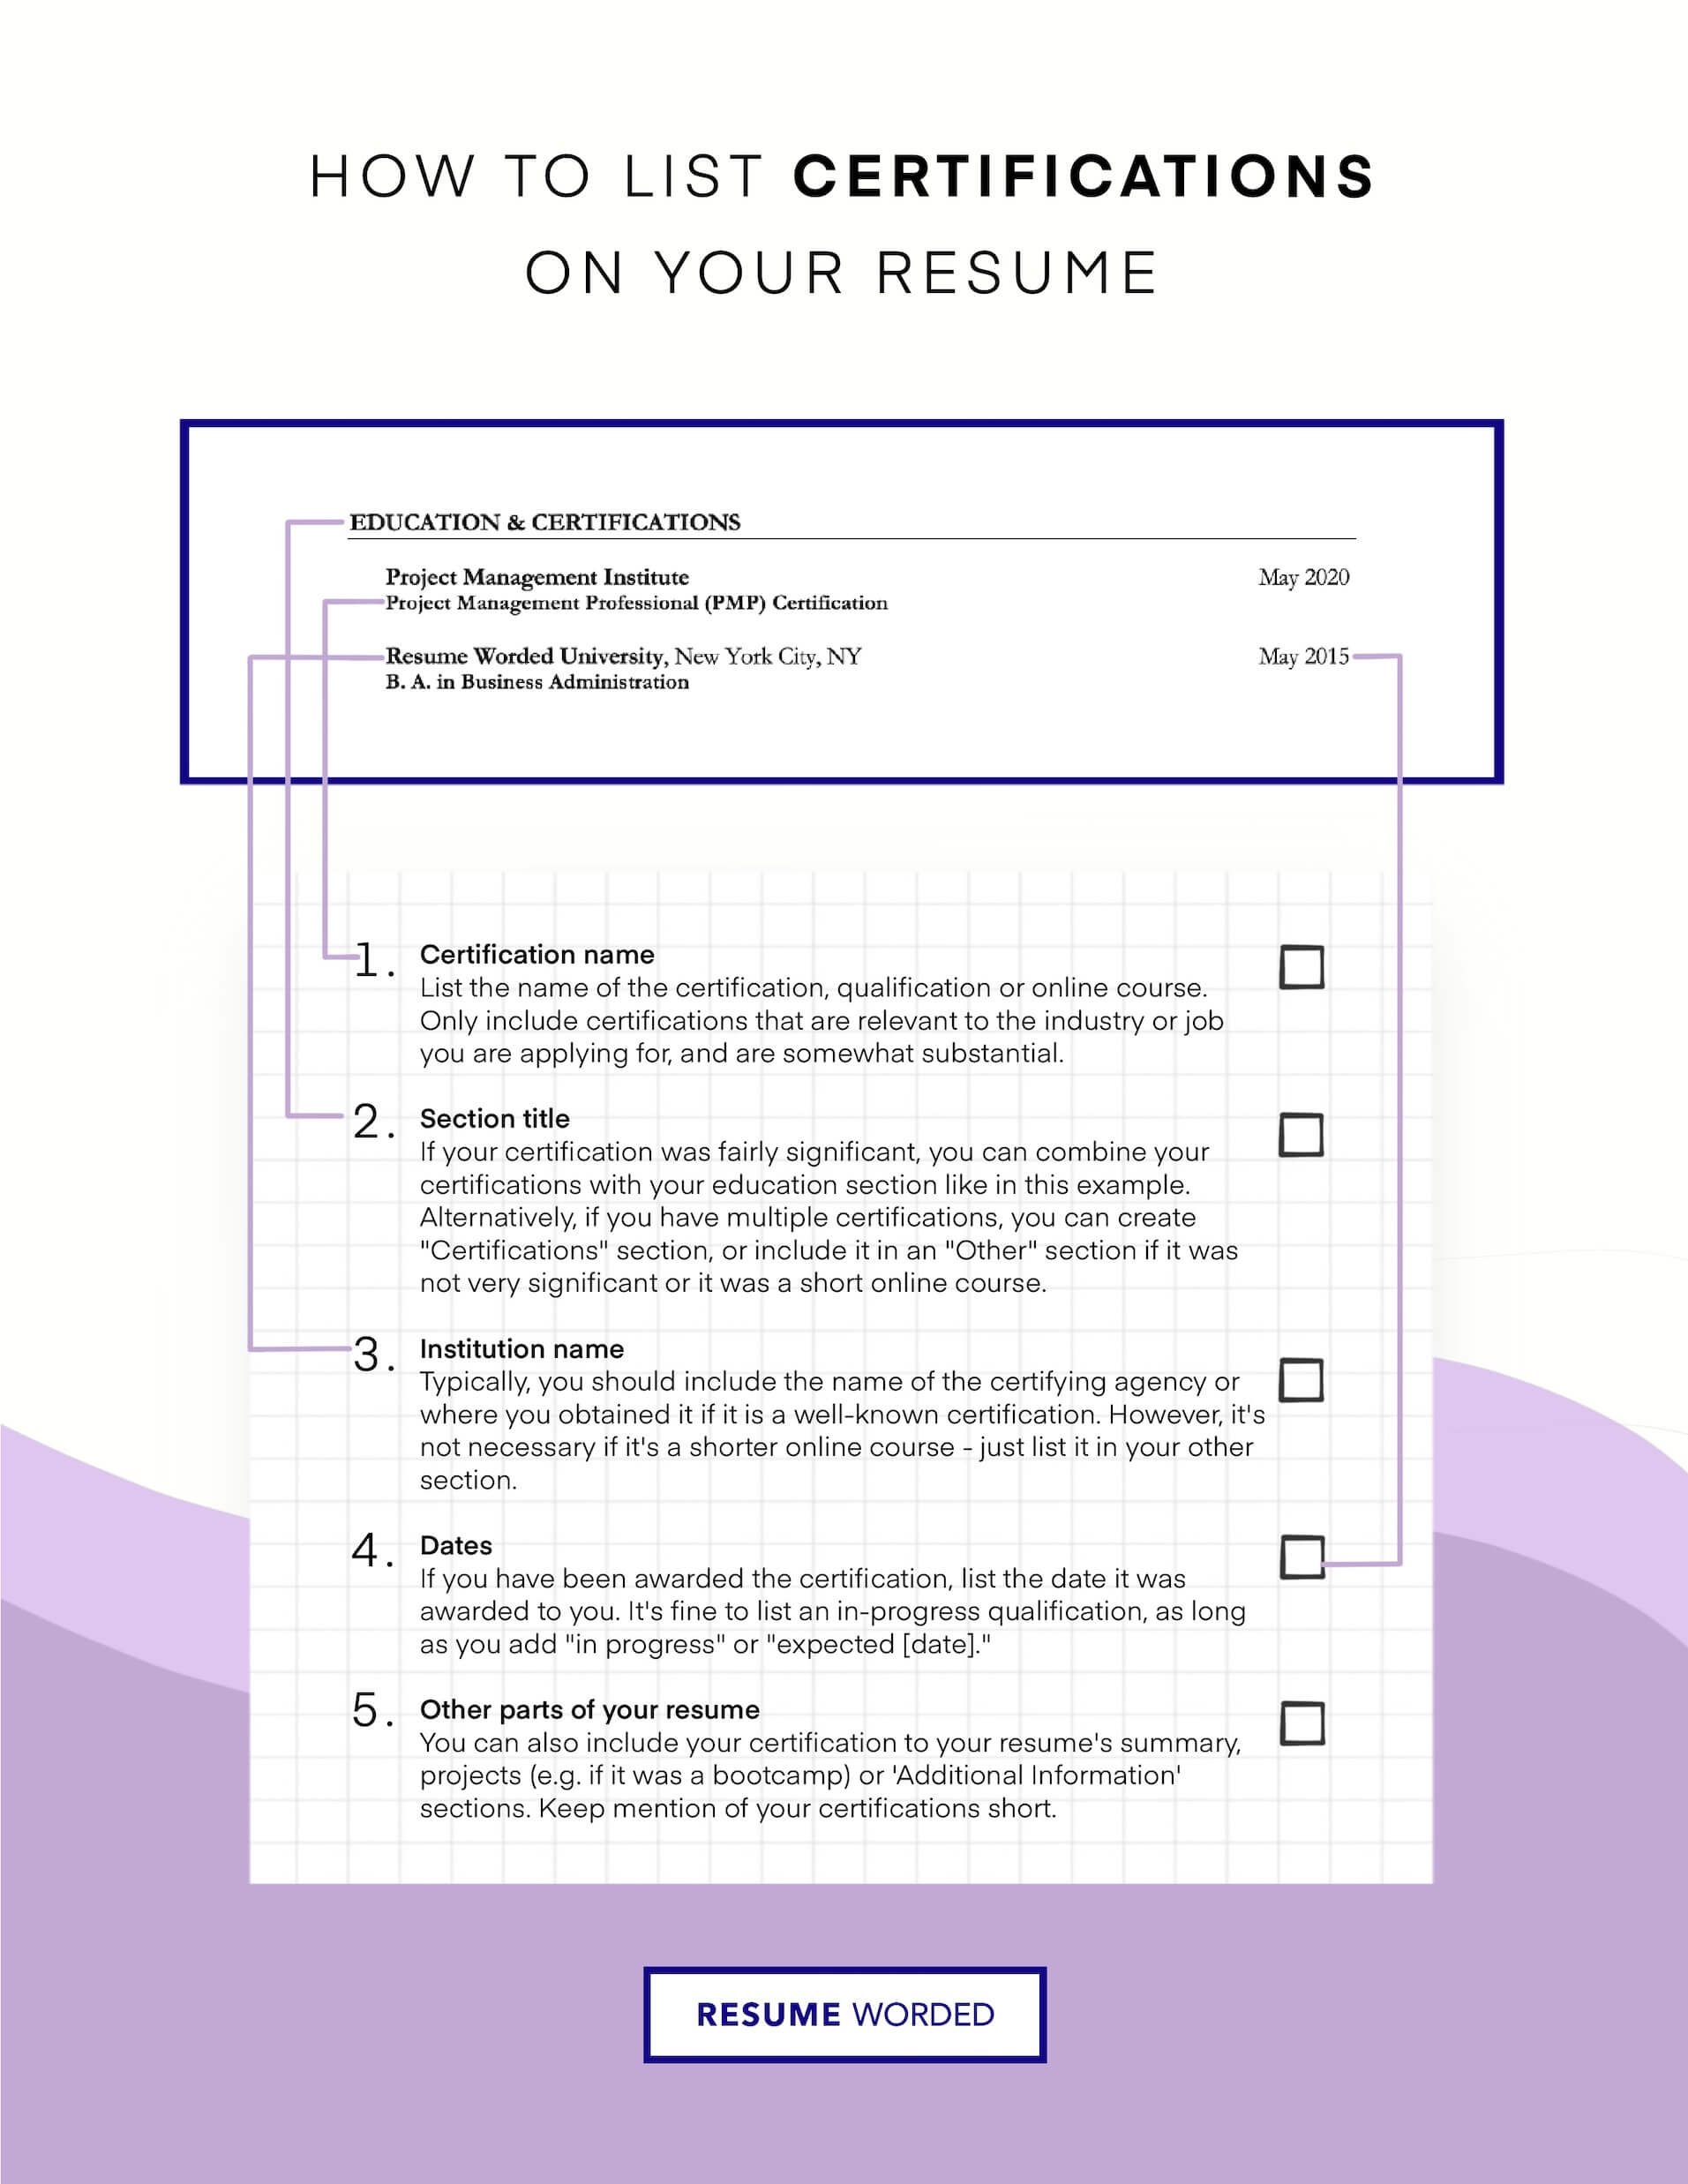 Focus on relevant certifications - Electrician CV